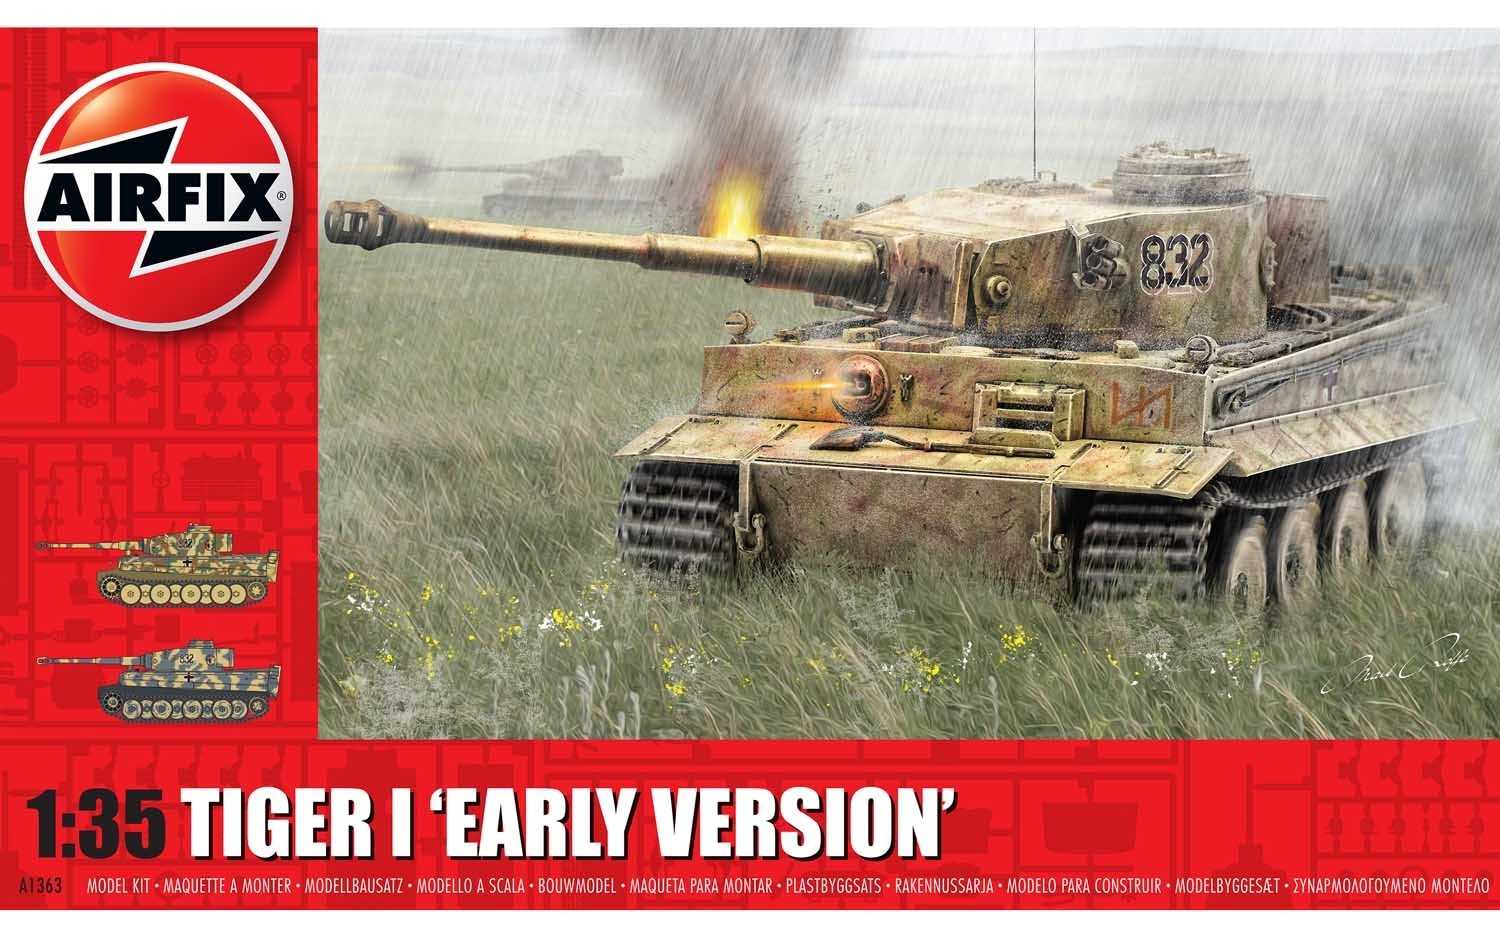 Airfix Classic Kit tank A1363 - Tiger-1, Early Version (1:35)